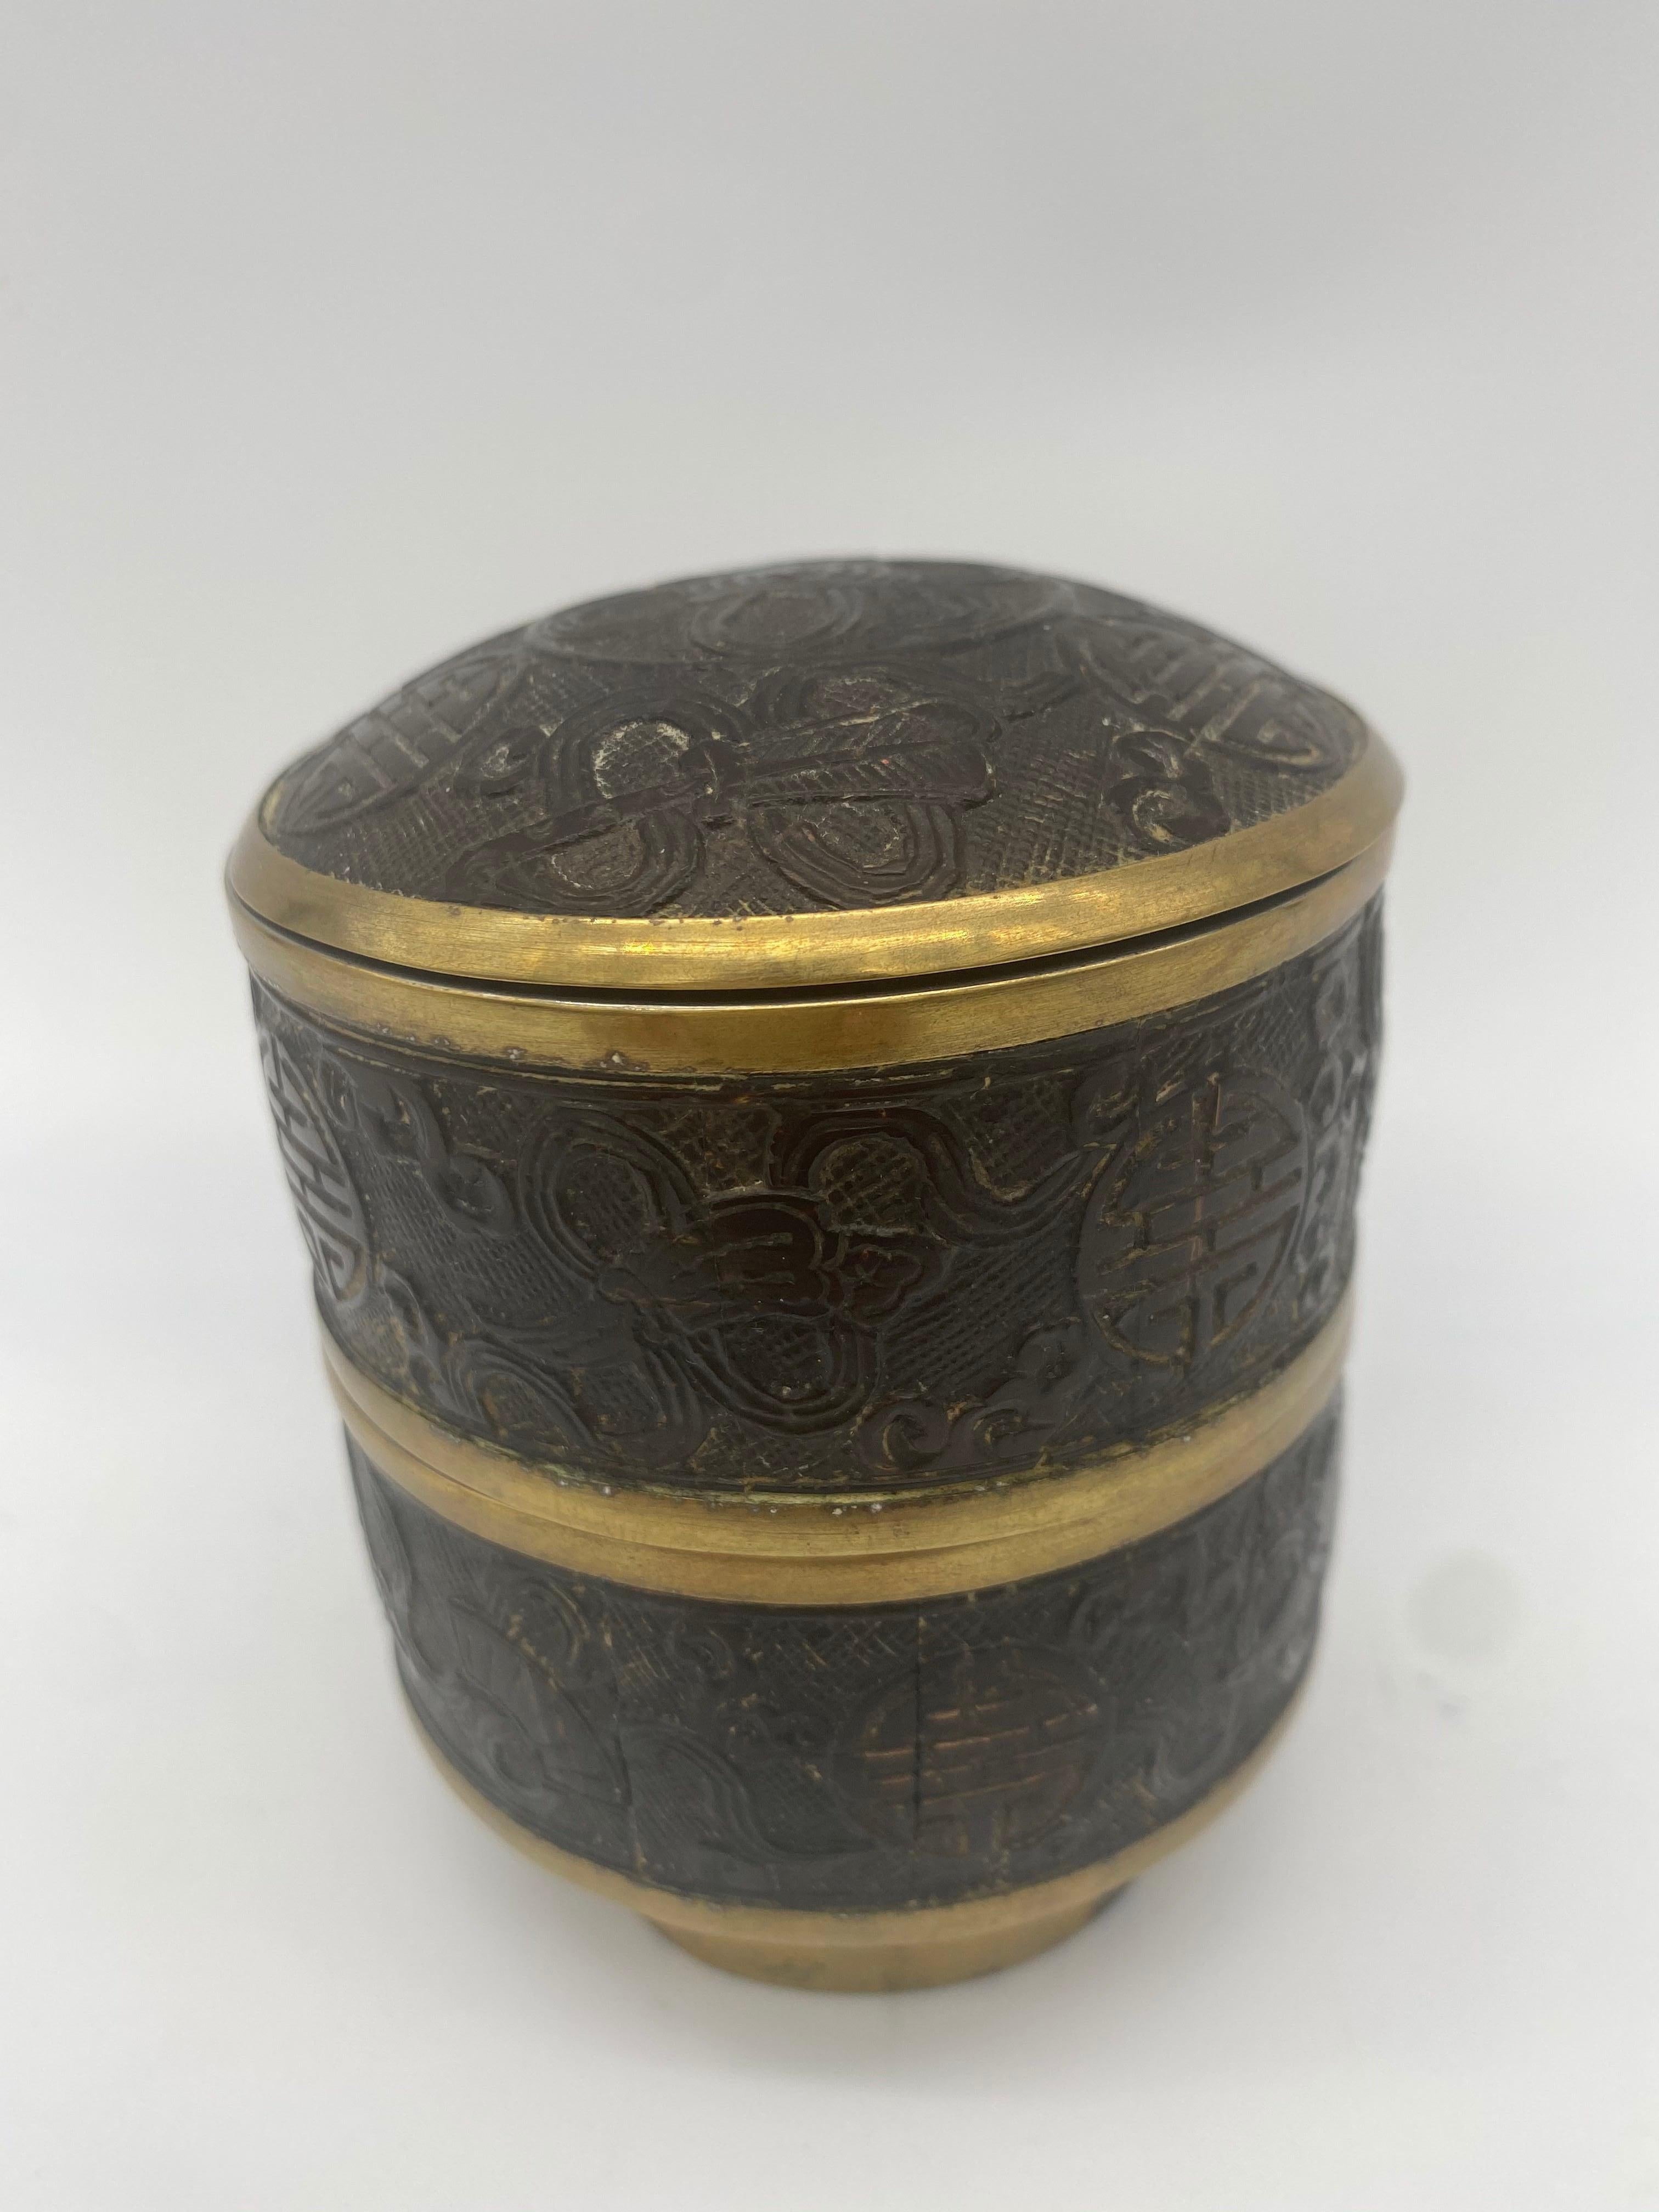 Antique 19th century Chinese tin coconut stacking box with mark: LiuYiJi, diameter 8 cm, high 10.5 cm.